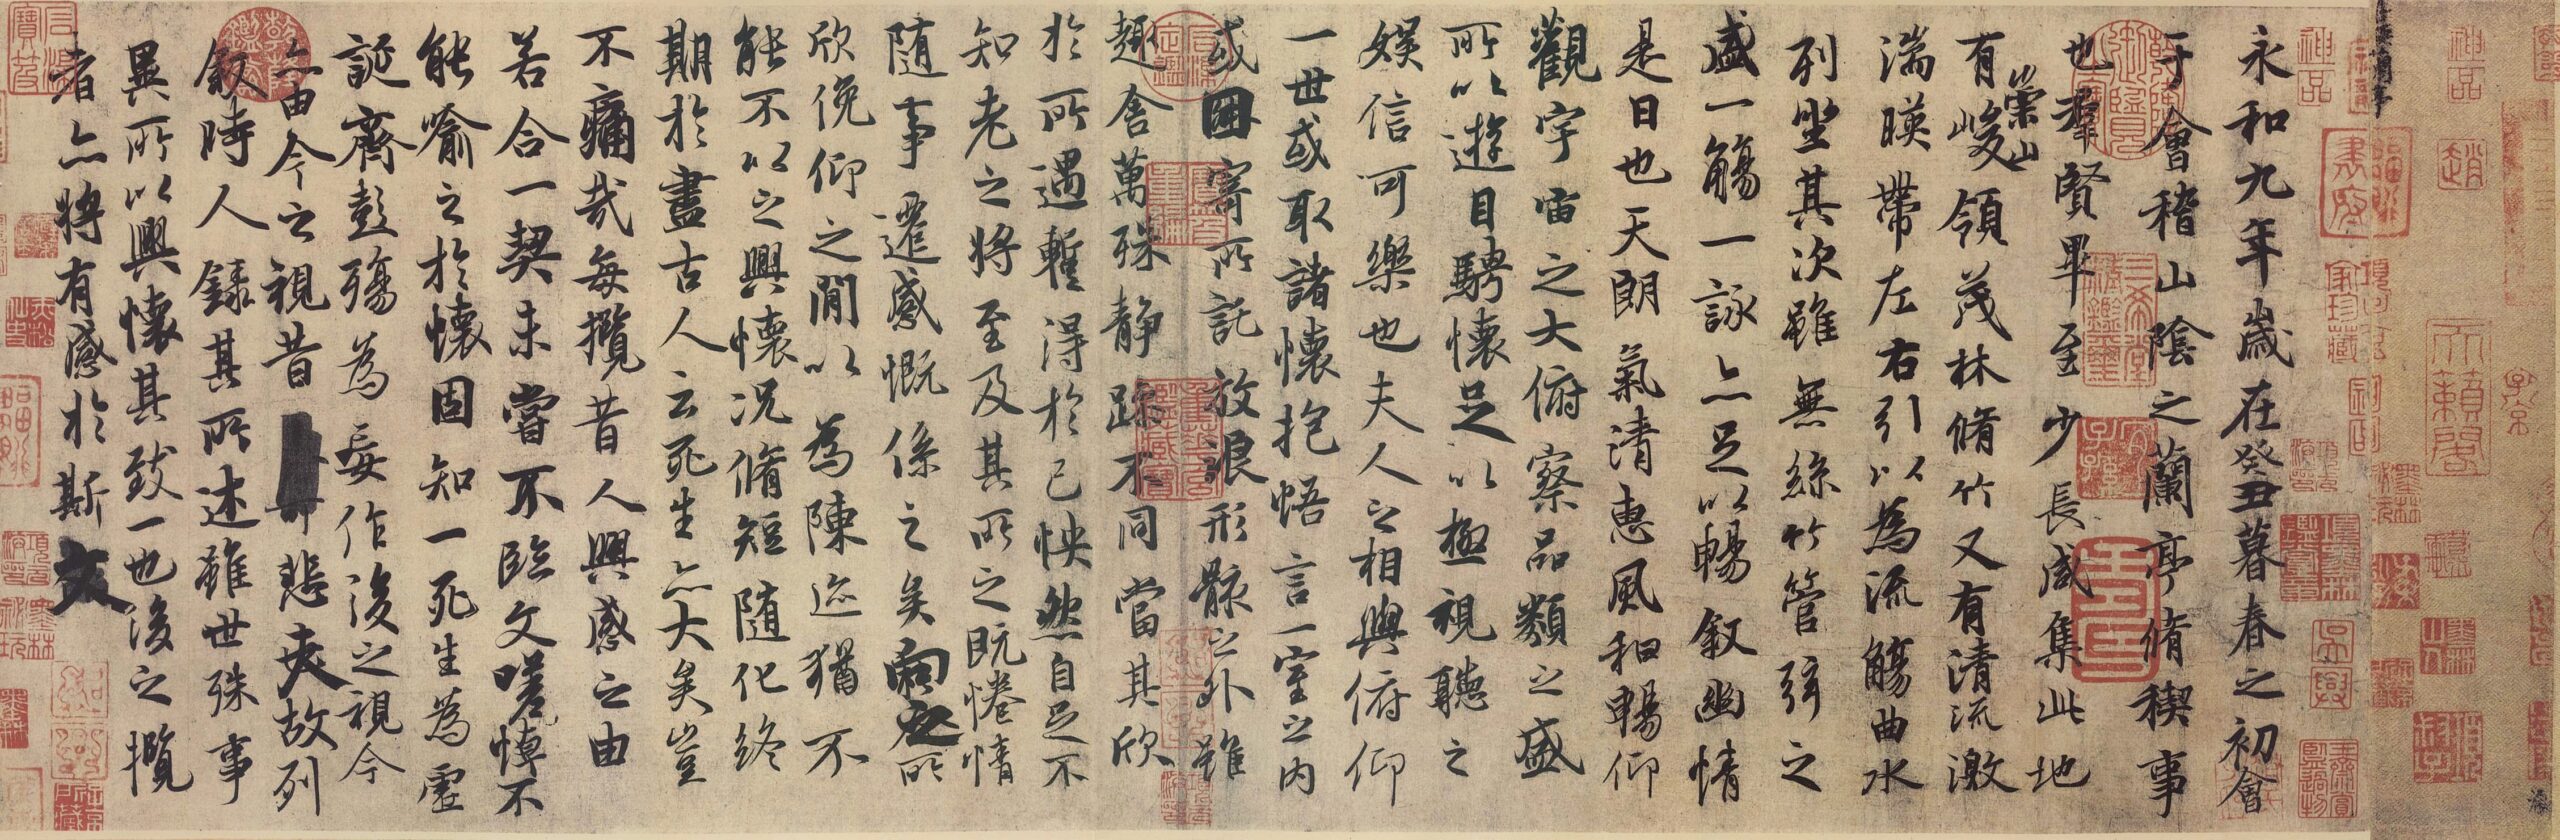 Chinese calligraphy, black ink on beige paper scroll. The text is of "Preface to Lanting Pavilion Collection" by Wang Xizhi.